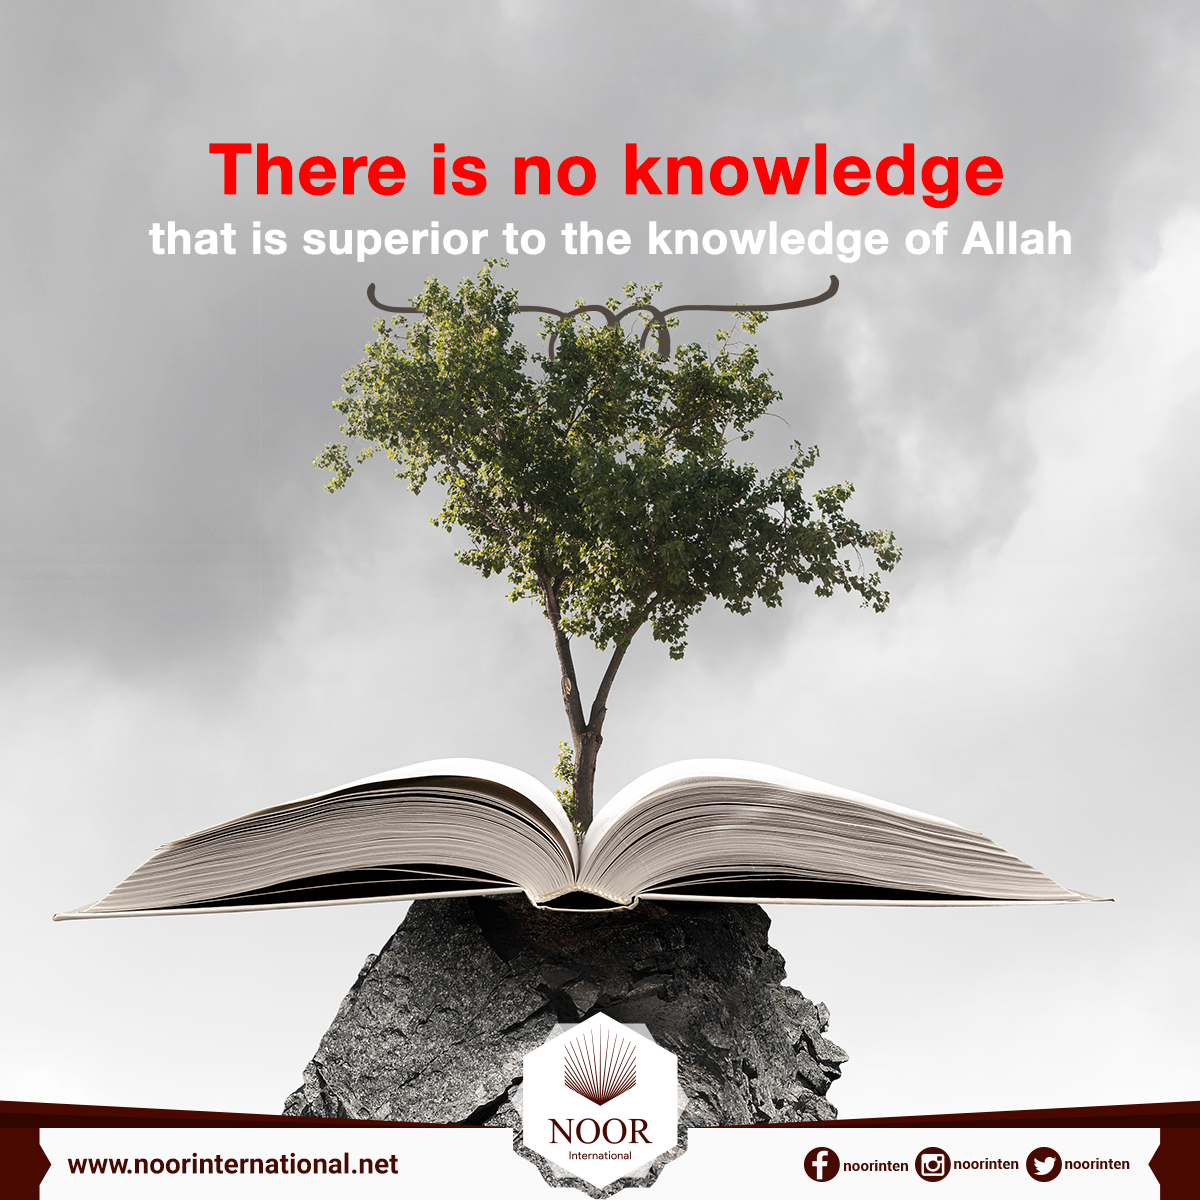 There is no knowledge that is superior to the knowledge of Allah